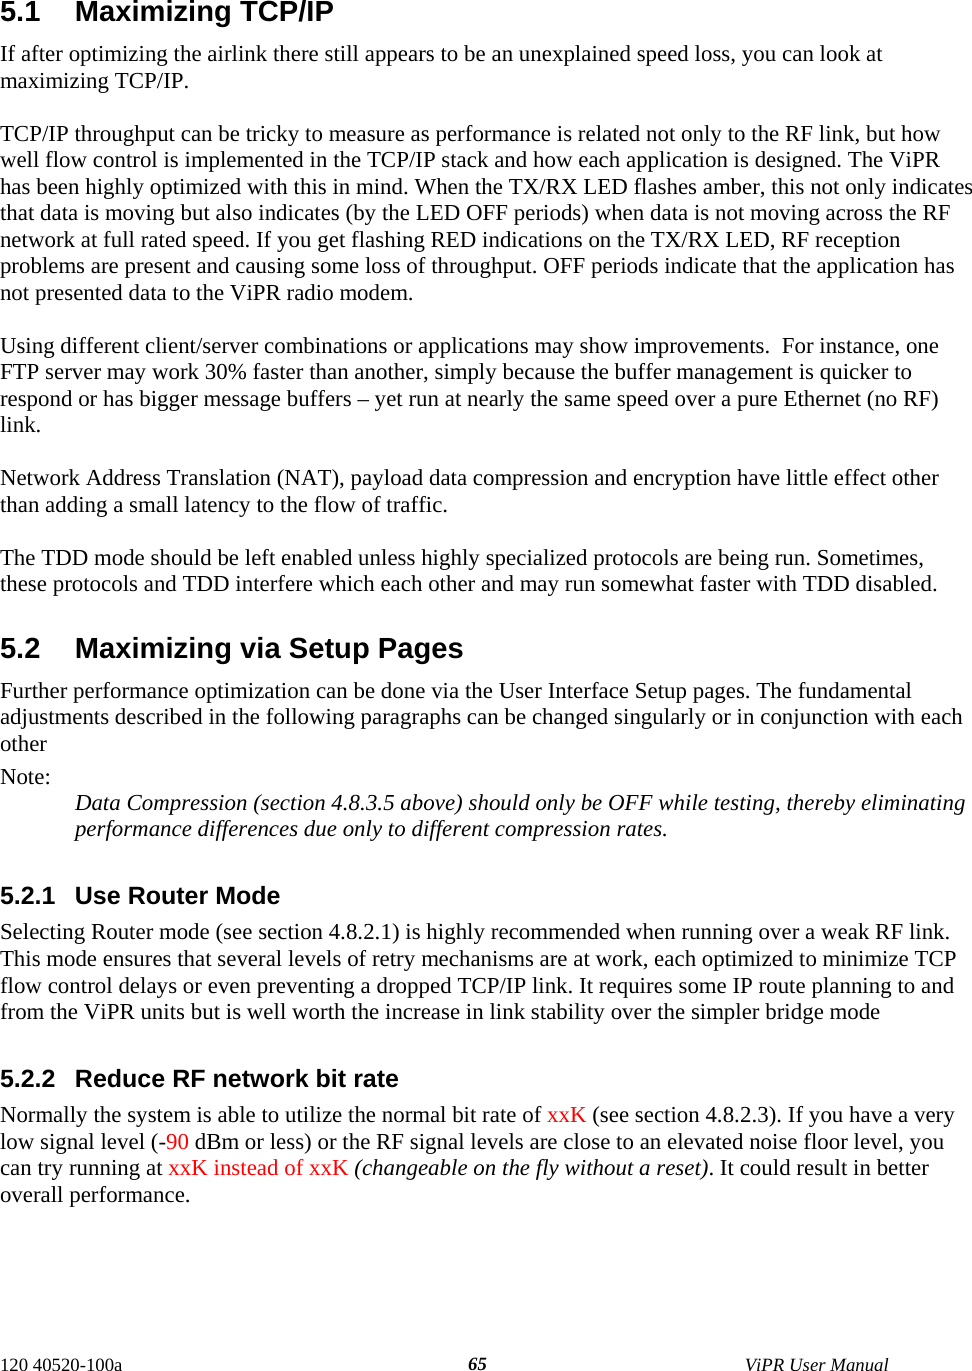  5.1 Maximizing TCP/IP If after optimizing the airlink there still appears to be an unexplained speed loss, you can look at maximizing TCP/IP.   TCP/IP throughput can be tricky to measure as performance is related not only to the RF link, but how well flow control is implemented in the TCP/IP stack and how each application is designed. The ViPR has been highly optimized with this in mind. When the TX/RX LED flashes amber, this not only indicates that data is moving but also indicates (by the LED OFF periods) when data is not moving across the RF network at full rated speed. If you get flashing RED indications on the TX/RX LED, RF reception problems are present and causing some loss of throughput. OFF periods indicate that the application has not presented data to the ViPR radio modem.  Using different client/server combinations or applications may show improvements.  For instance, one FTP server may work 30% faster than another, simply because the buffer management is quicker to respond or has bigger message buffers – yet run at nearly the same speed over a pure Ethernet (no RF) link.  Network Address Translation (NAT), payload data compression and encryption have little effect other than adding a small latency to the flow of traffic.  The TDD mode should be left enabled unless highly specialized protocols are being run. Sometimes, these protocols and TDD interfere which each other and may run somewhat faster with TDD disabled.  5.2  Maximizing via Setup Pages Further performance optimization can be done via the User Interface Setup pages. The fundamental adjustments described in the following paragraphs can be changed singularly or in conjunction with each other  Note:  Data Compression (section 4.8.3.5 above) should only be OFF while testing, thereby eliminating performance differences due only to different compression rates.  5.2.1  Use Router Mode Selecting Router mode (see section 4.8.2.1) is highly recommended when running over a weak RF link. This mode ensures that several levels of retry mechanisms are at work, each optimized to minimize TCP flow control delays or even preventing a dropped TCP/IP link. It requires some IP route planning to and from the ViPR units but is well worth the increase in link stability over the simpler bridge mode  5.2.2  Reduce RF network bit rate Normally the system is able to utilize the normal bit rate of xxK (see section 4.8.2.3). If you have a very low signal level (-90 dBm or less) or the RF signal levels are close to an elevated noise floor level, you can try running at xxK instead of xxK (changeable on the fly without a reset). It could result in better overall performance. 120 40520-100a    ViPR User Manual  65